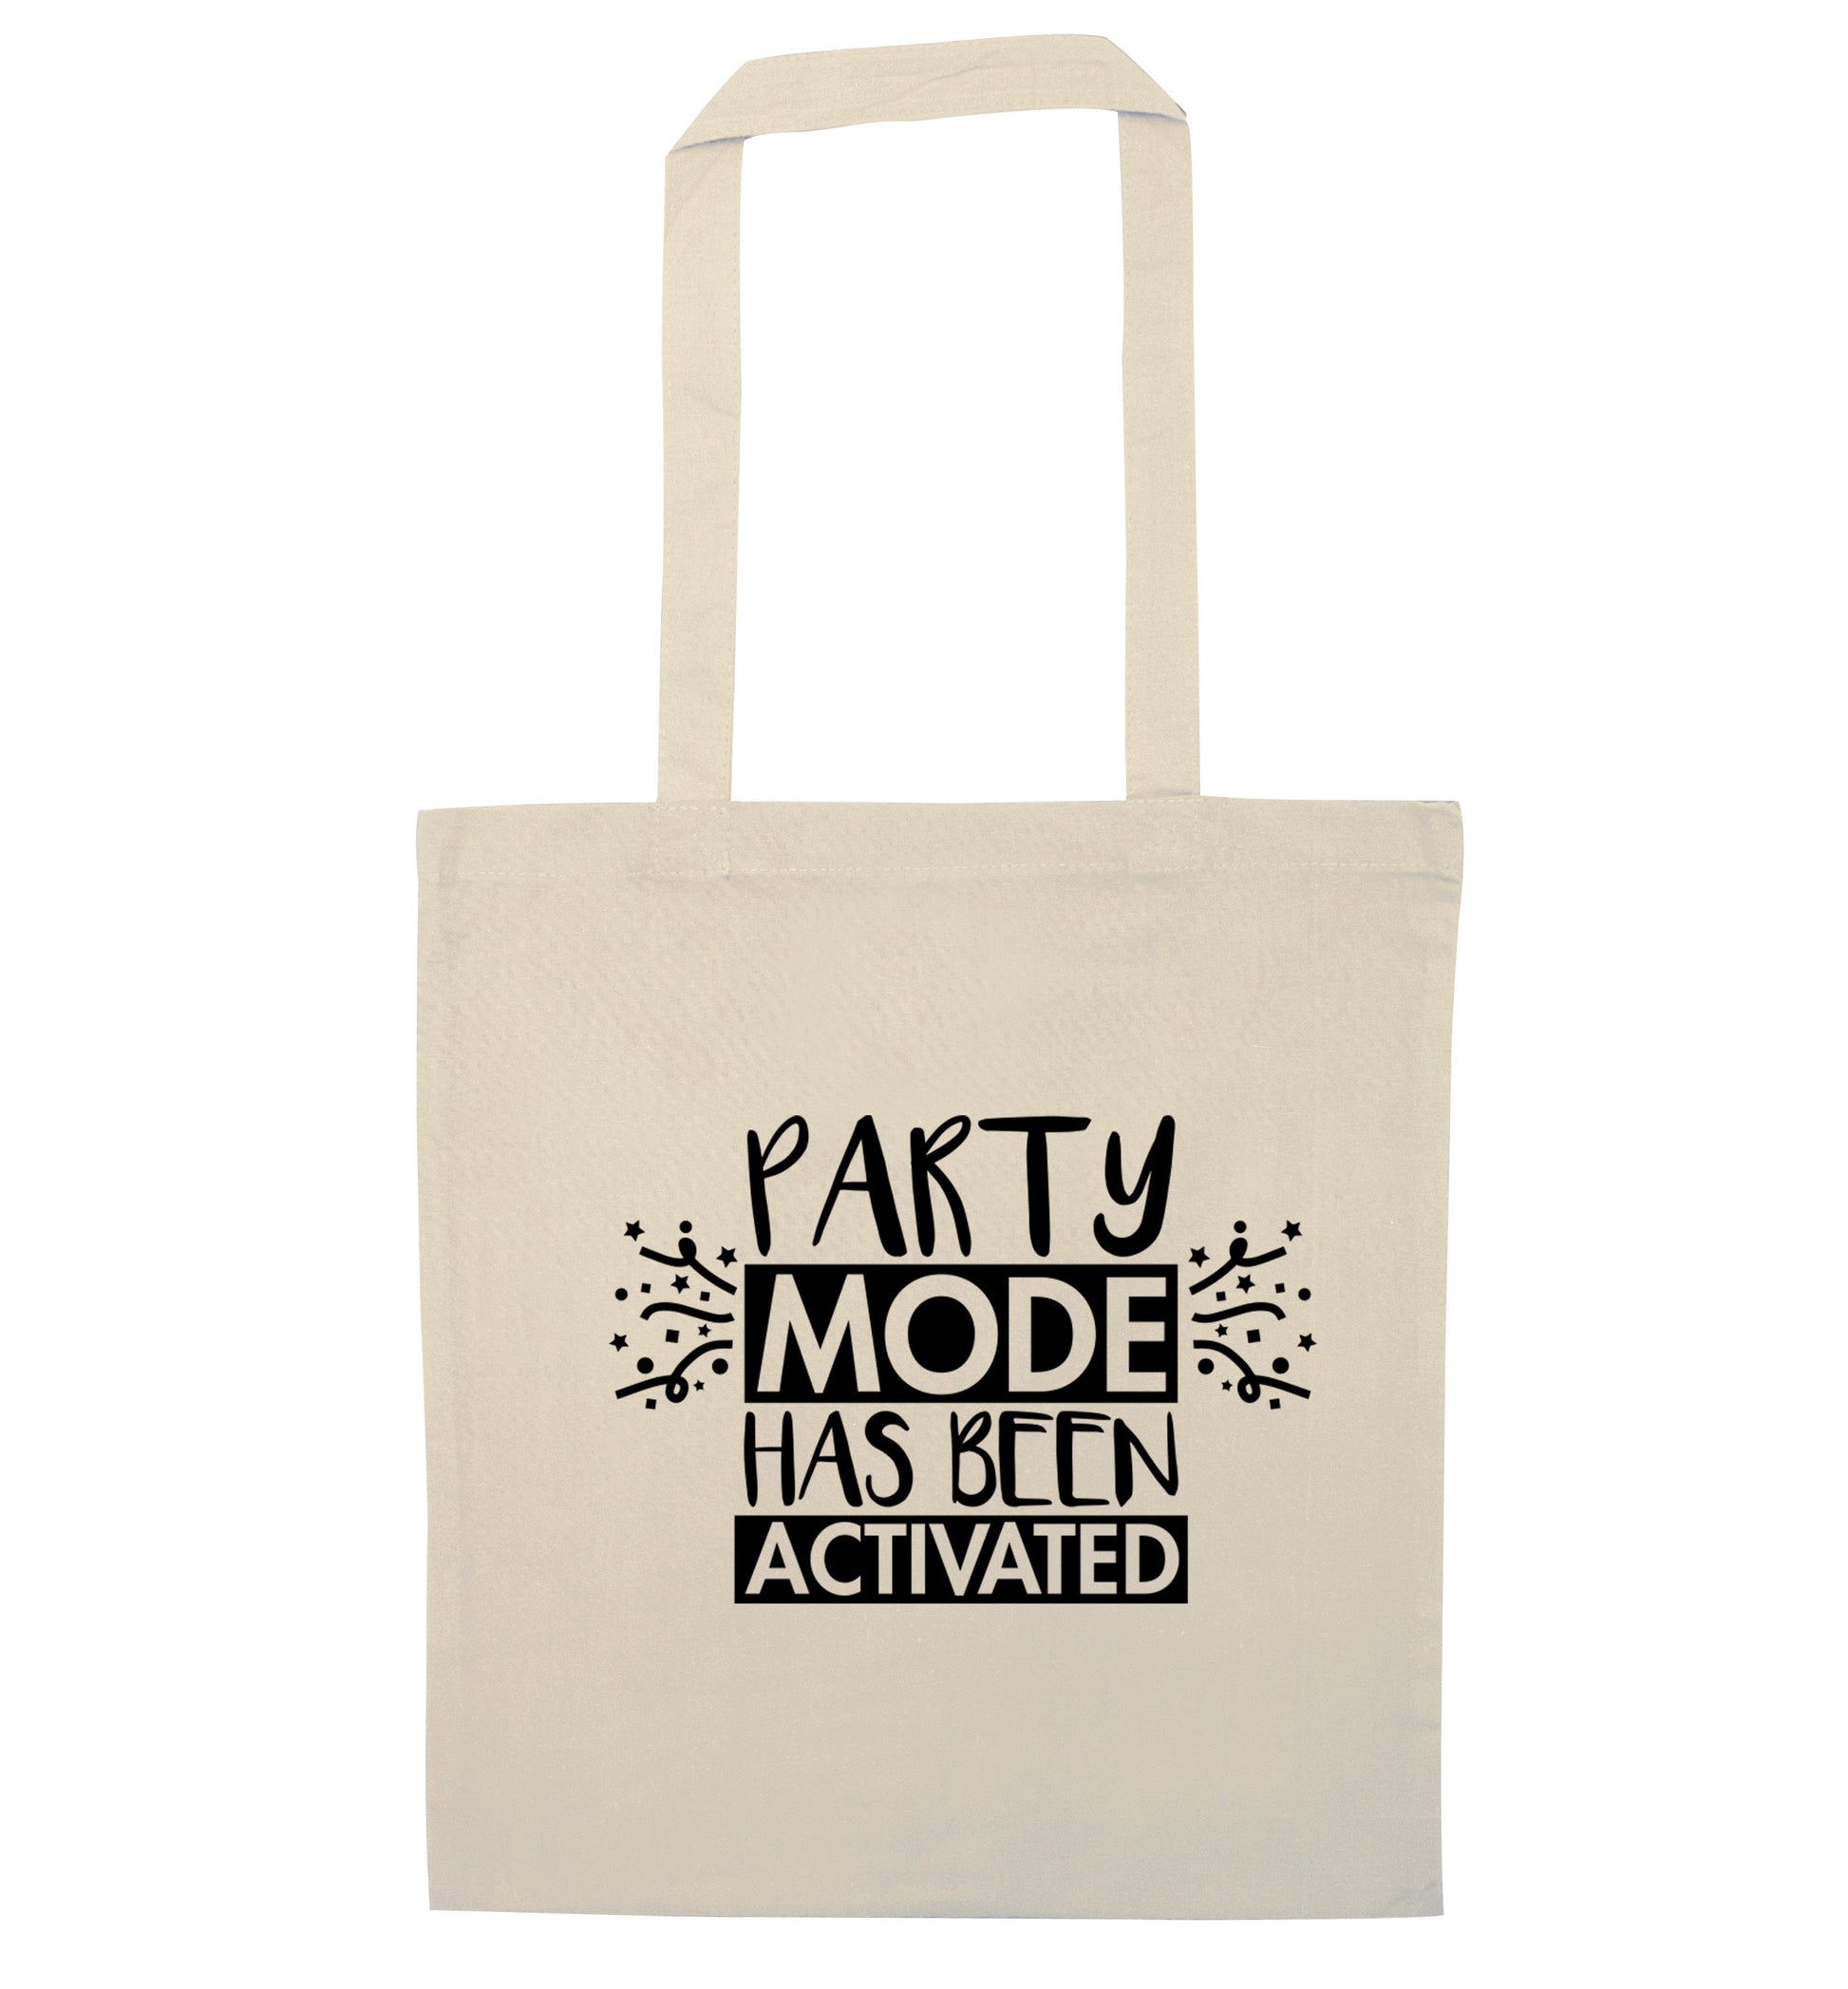 Please do not disturb party mode has been activated natural tote bag